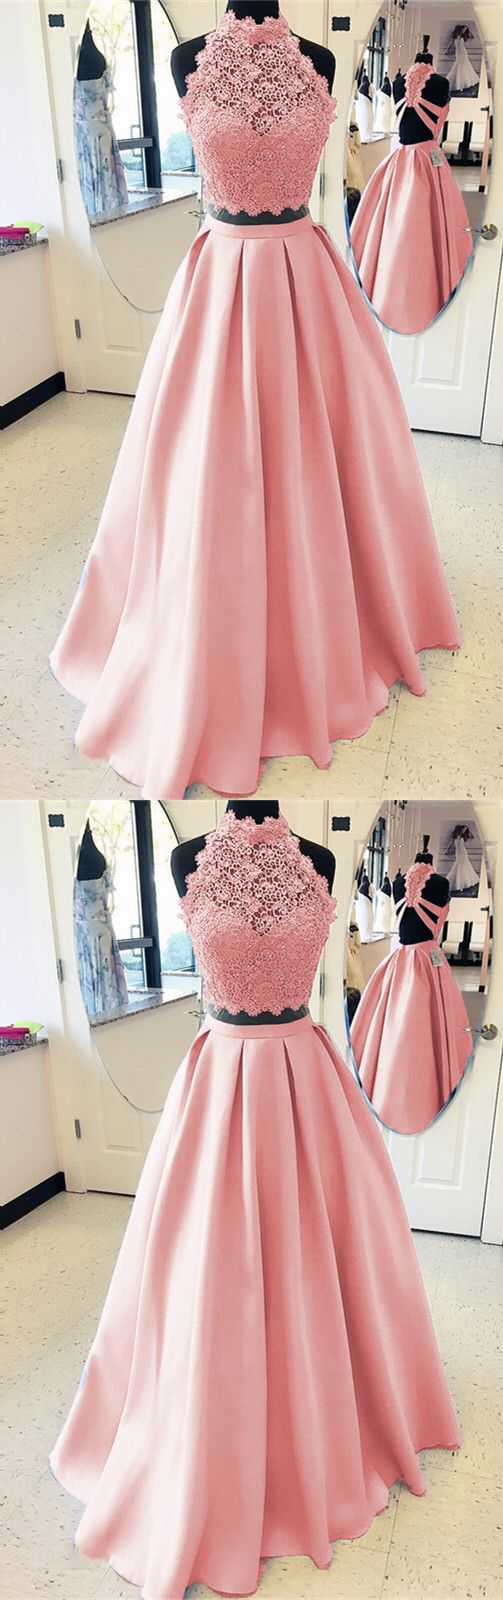 A-line High Neck Open Back Satin Prom Dresses Two Piece M6443